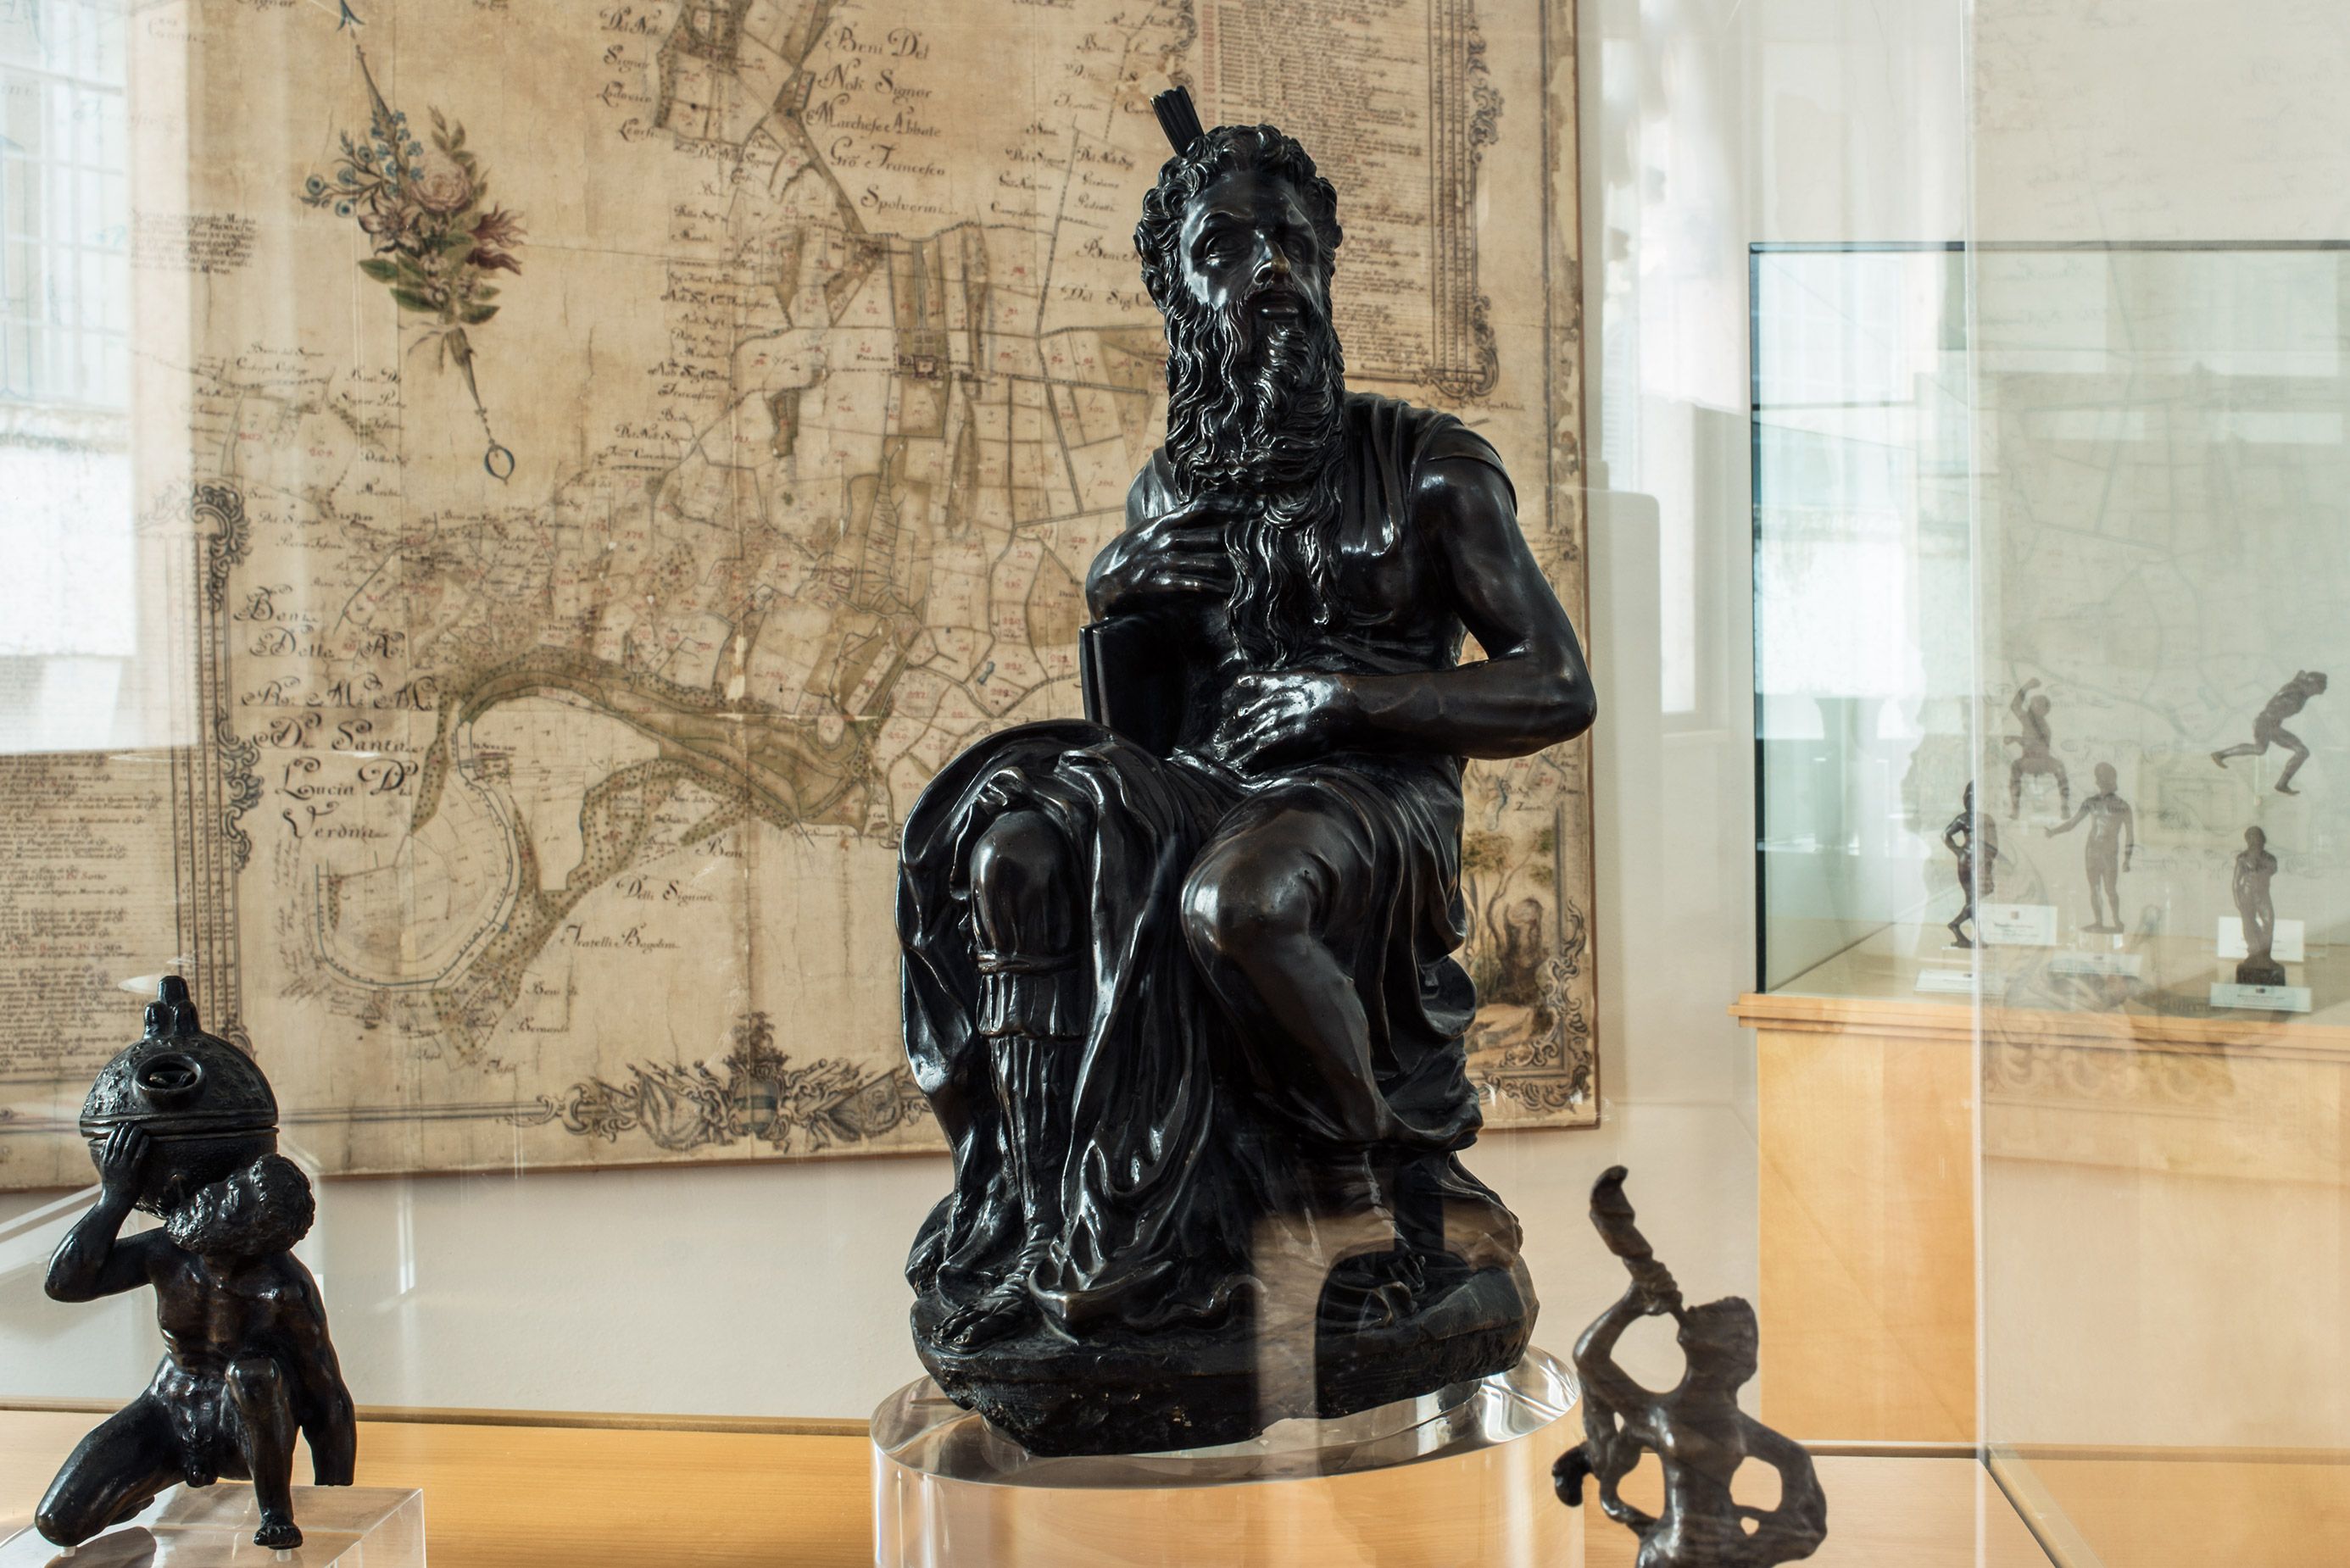 Rooms of the Renaissance bronzes